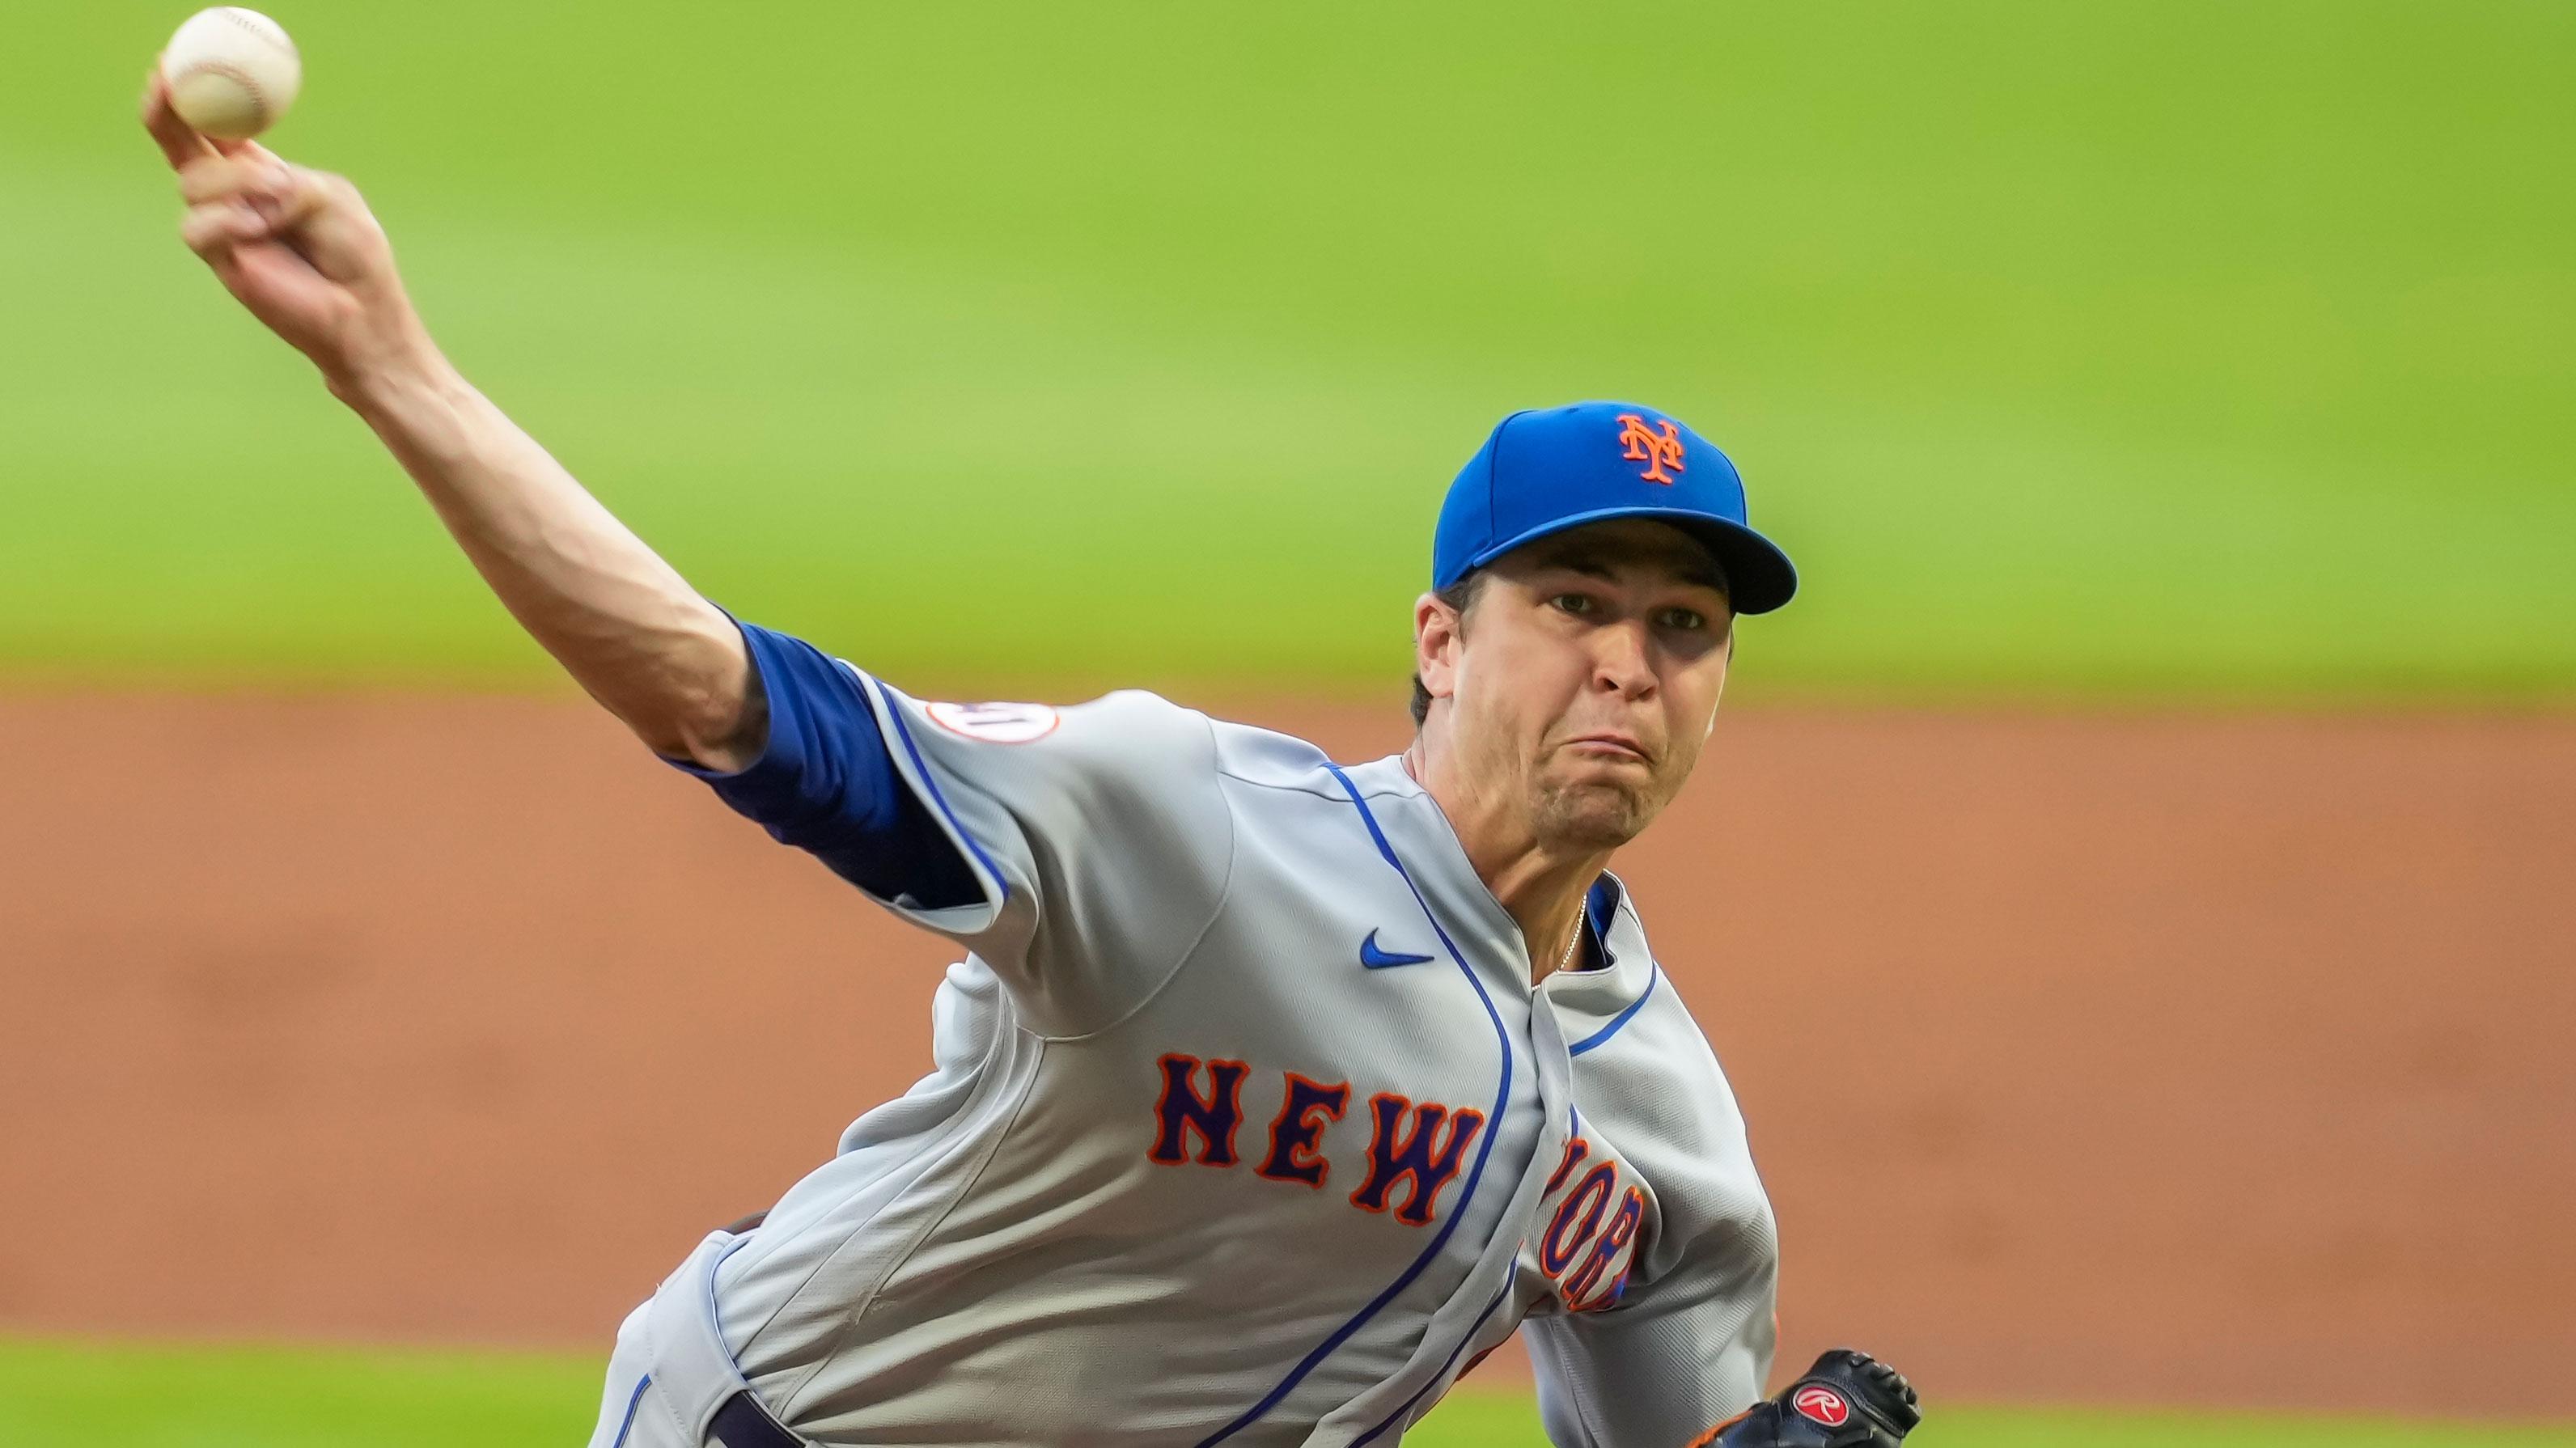 Jul 1, 2021; Cumberland, Georgia, USA; New York Mets starting pitcher Jacob deGrom (48) pitches against the Atlanta Braves during the first inning at Truist Park. / Dale Zanine-USA TODAY Sports